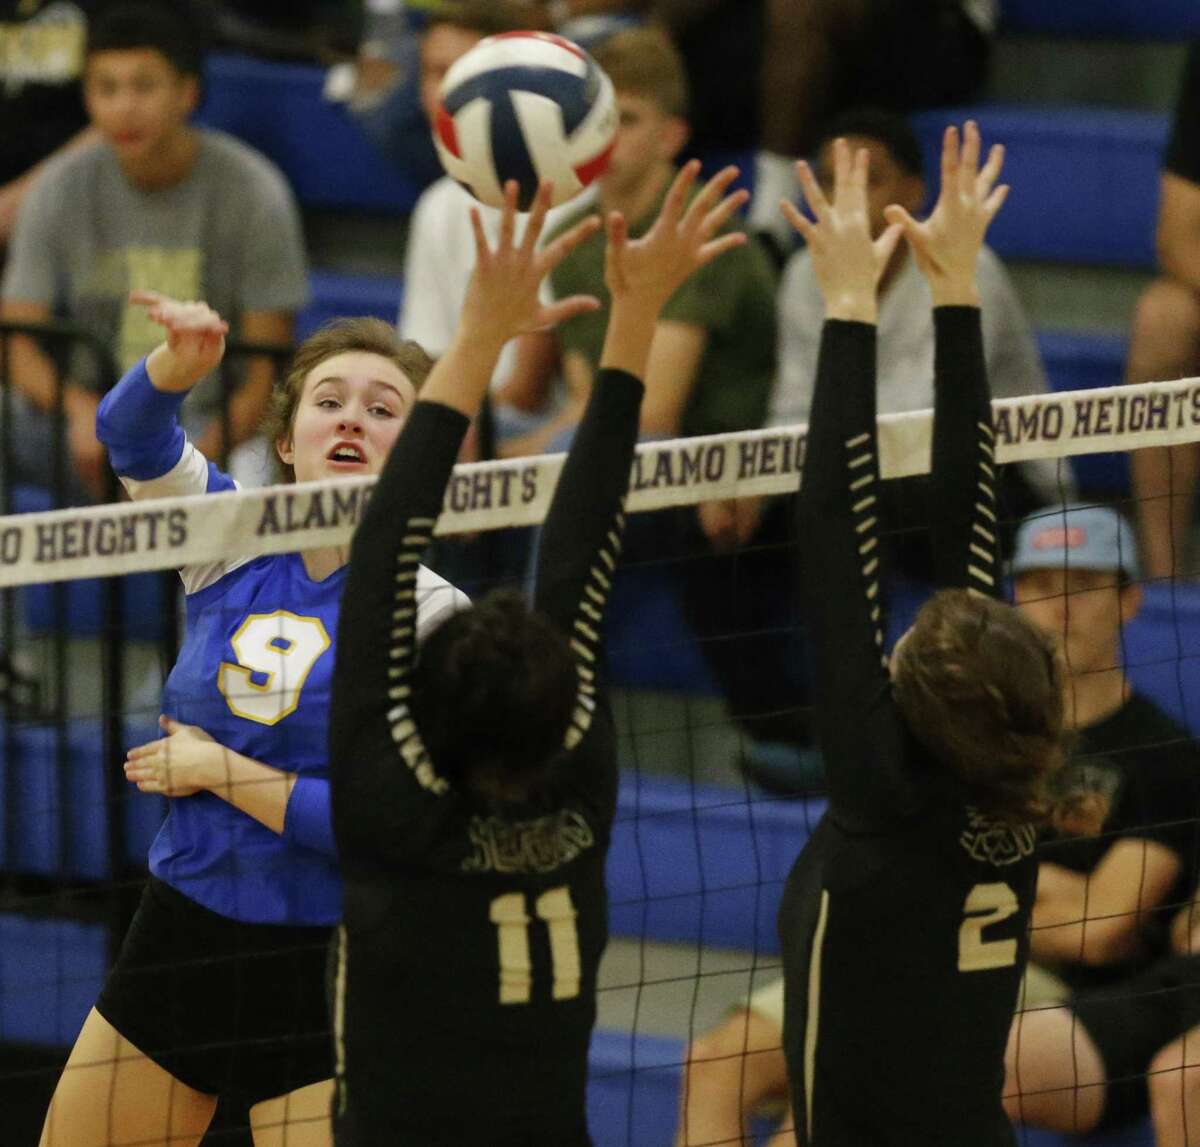 Alamo Heights' Megan Wilke, left, shown in an Oct. 13 file photo, helped lead Seguin to victories over Austin Ann Richards and Richmond Foster last week.